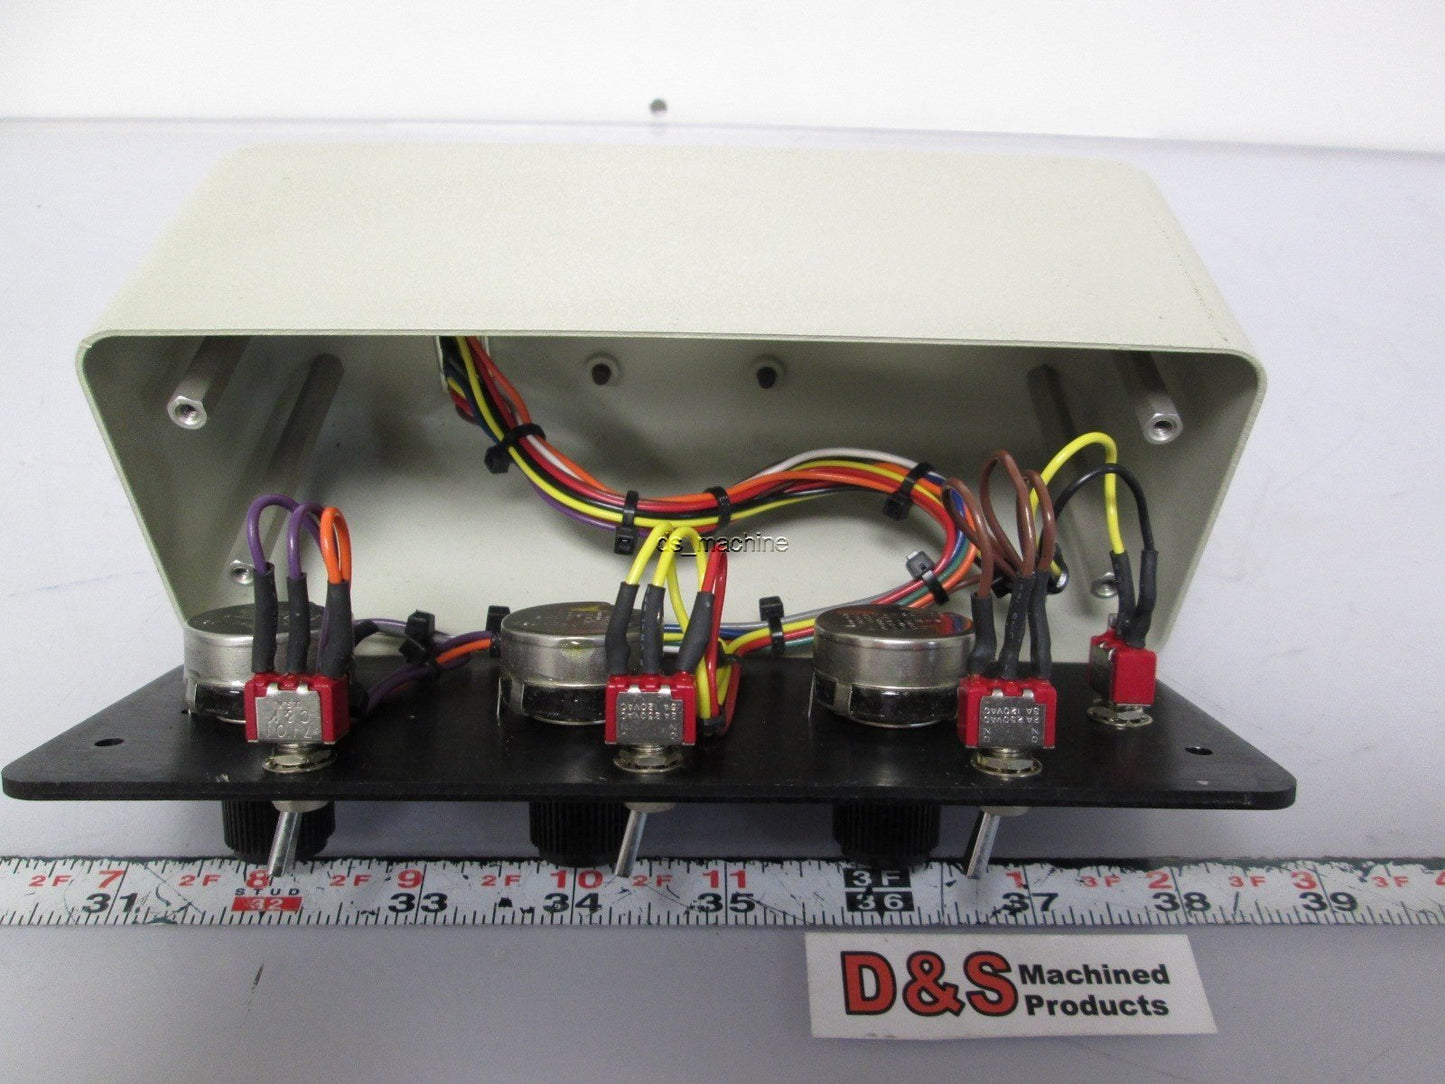 Used Light Control Box 010-2354-001 for Microscope or Machine Vision 3 Channel Remote